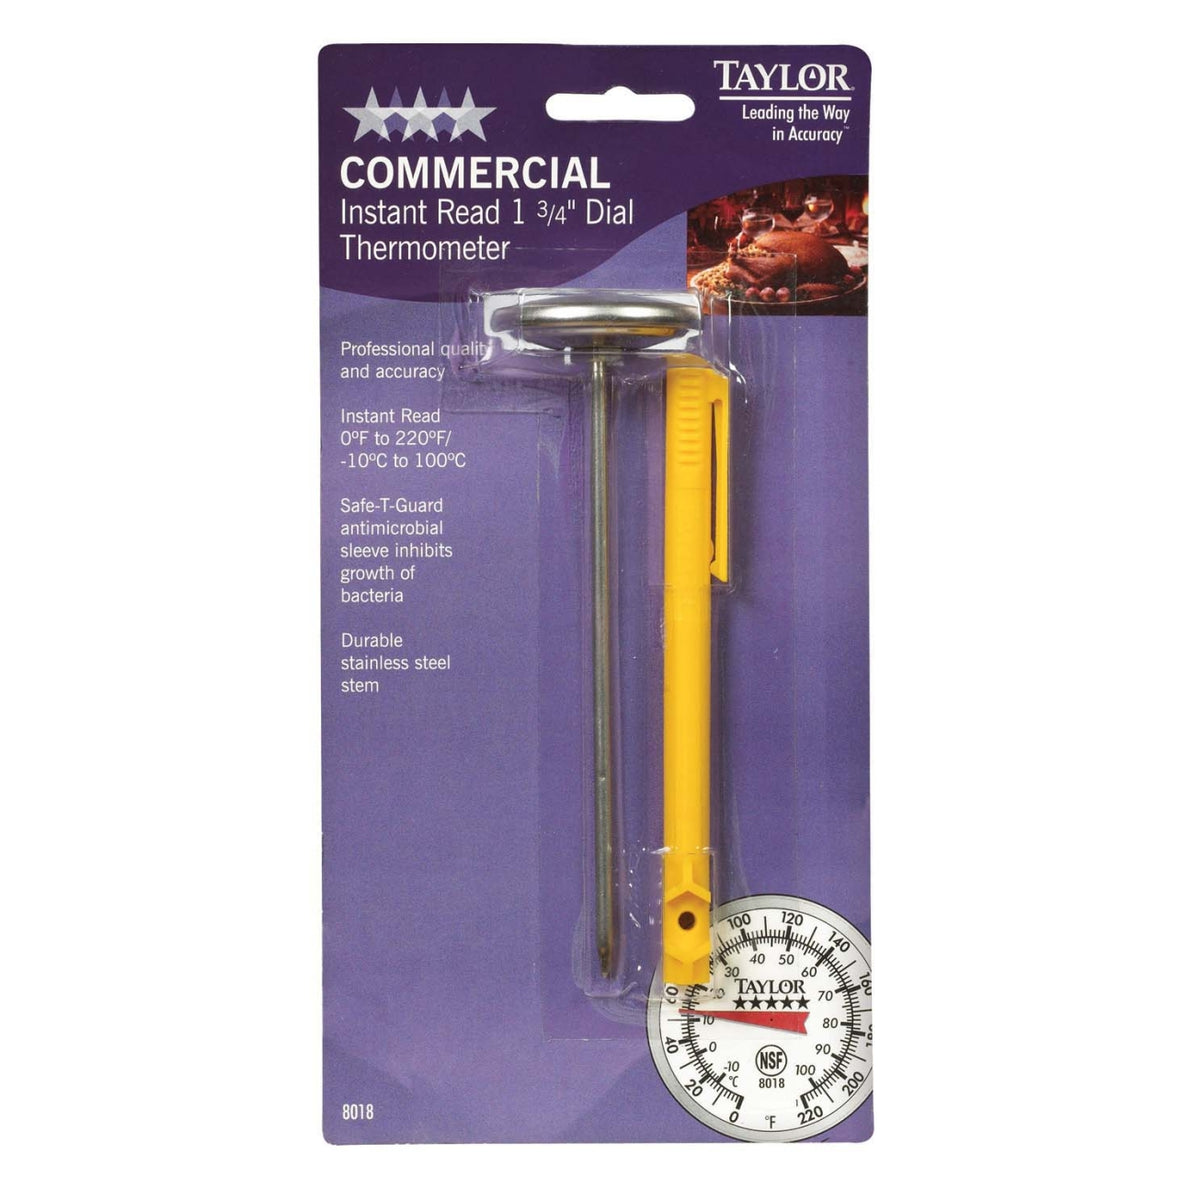 buy cooking thermometers & timers at cheap rate in bulk. wholesale & retail kitchen goods & essentials store.